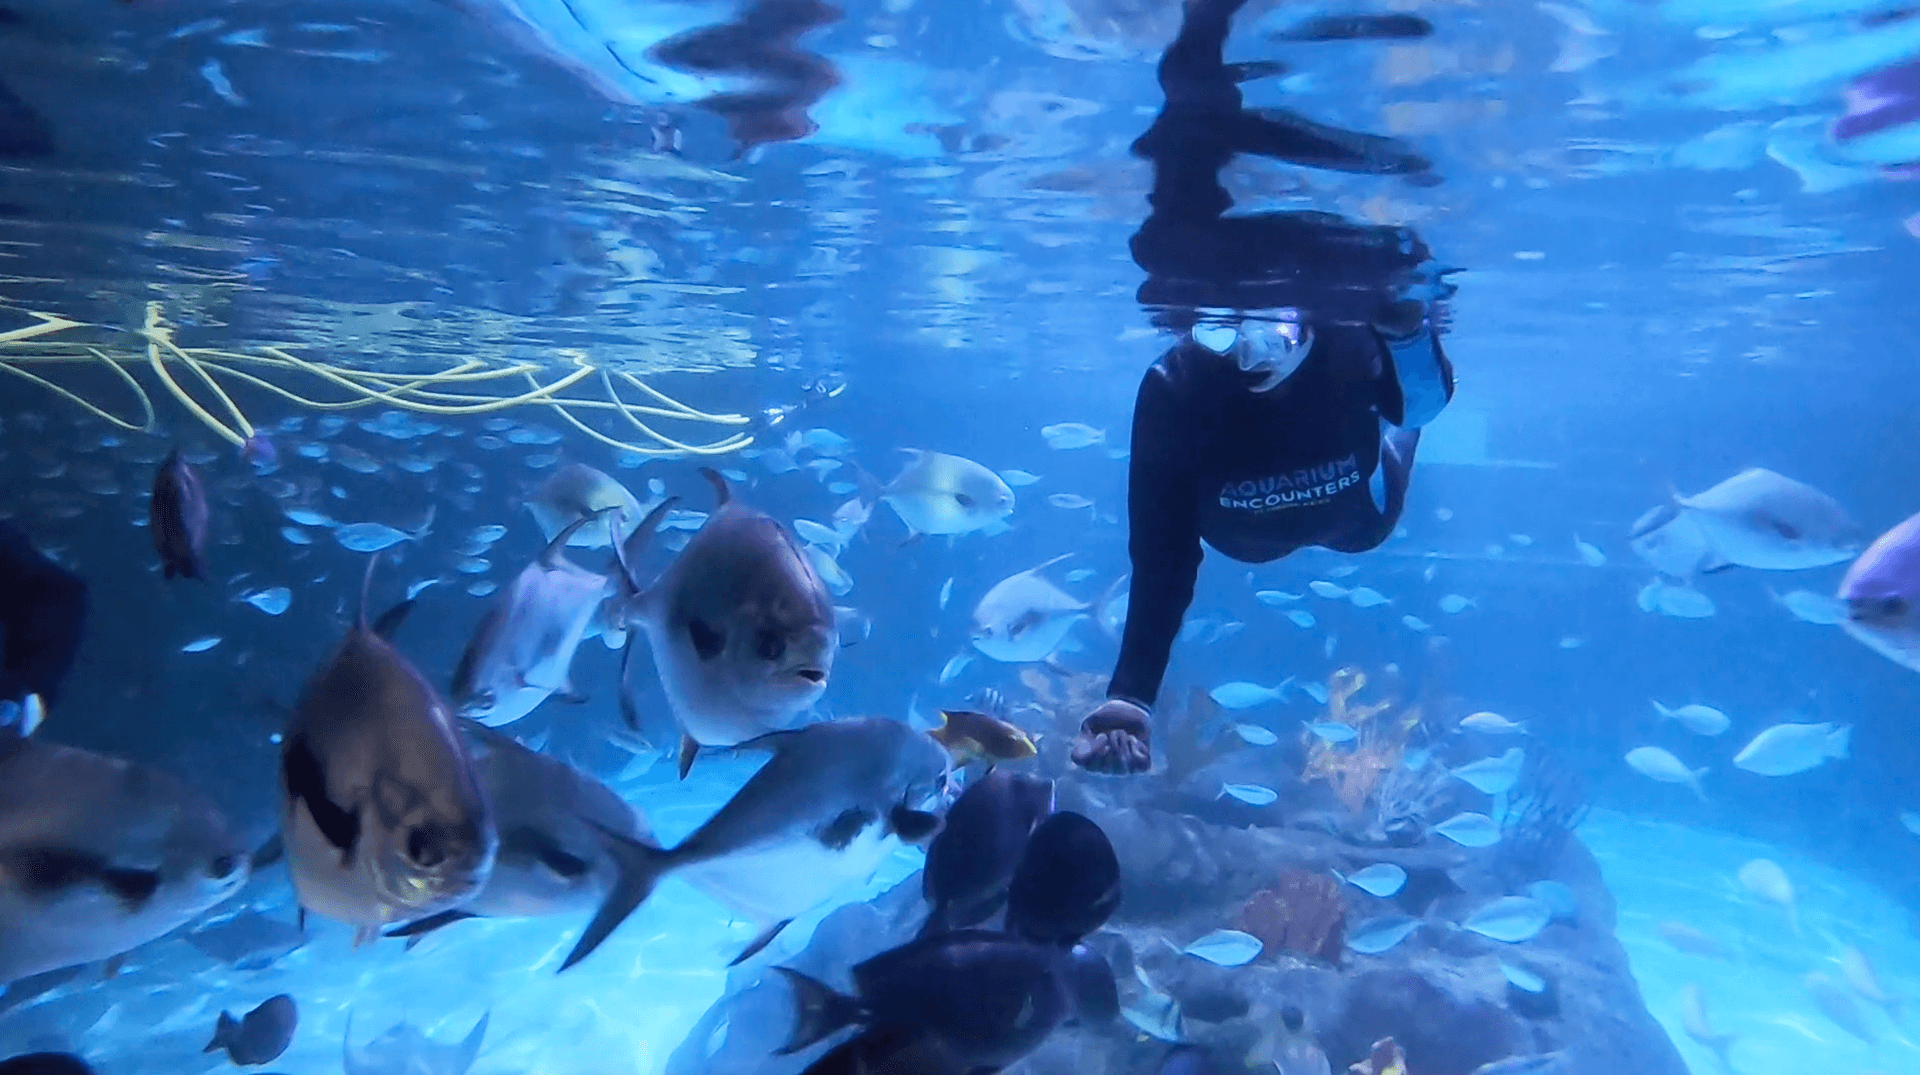 Lydia holds out her hand to feed a stingray while snorkeling in a tank full of fish at the Florida Keys Aquarium Encounters